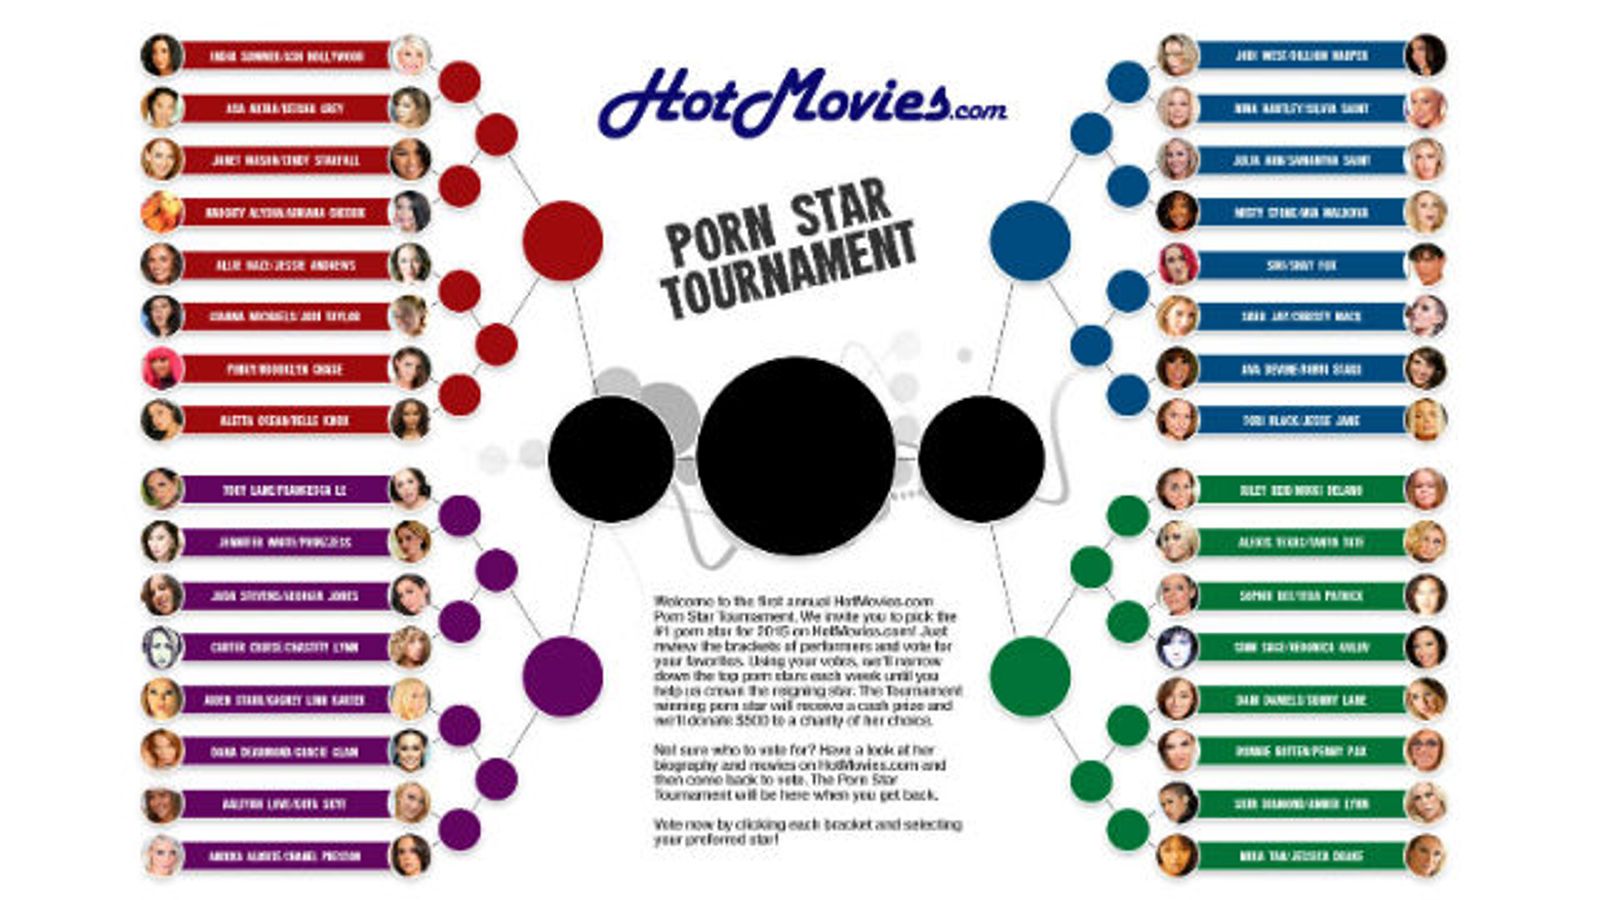 HotMovies.com Porn Star Bracket Promo for Charity Enters Round Two